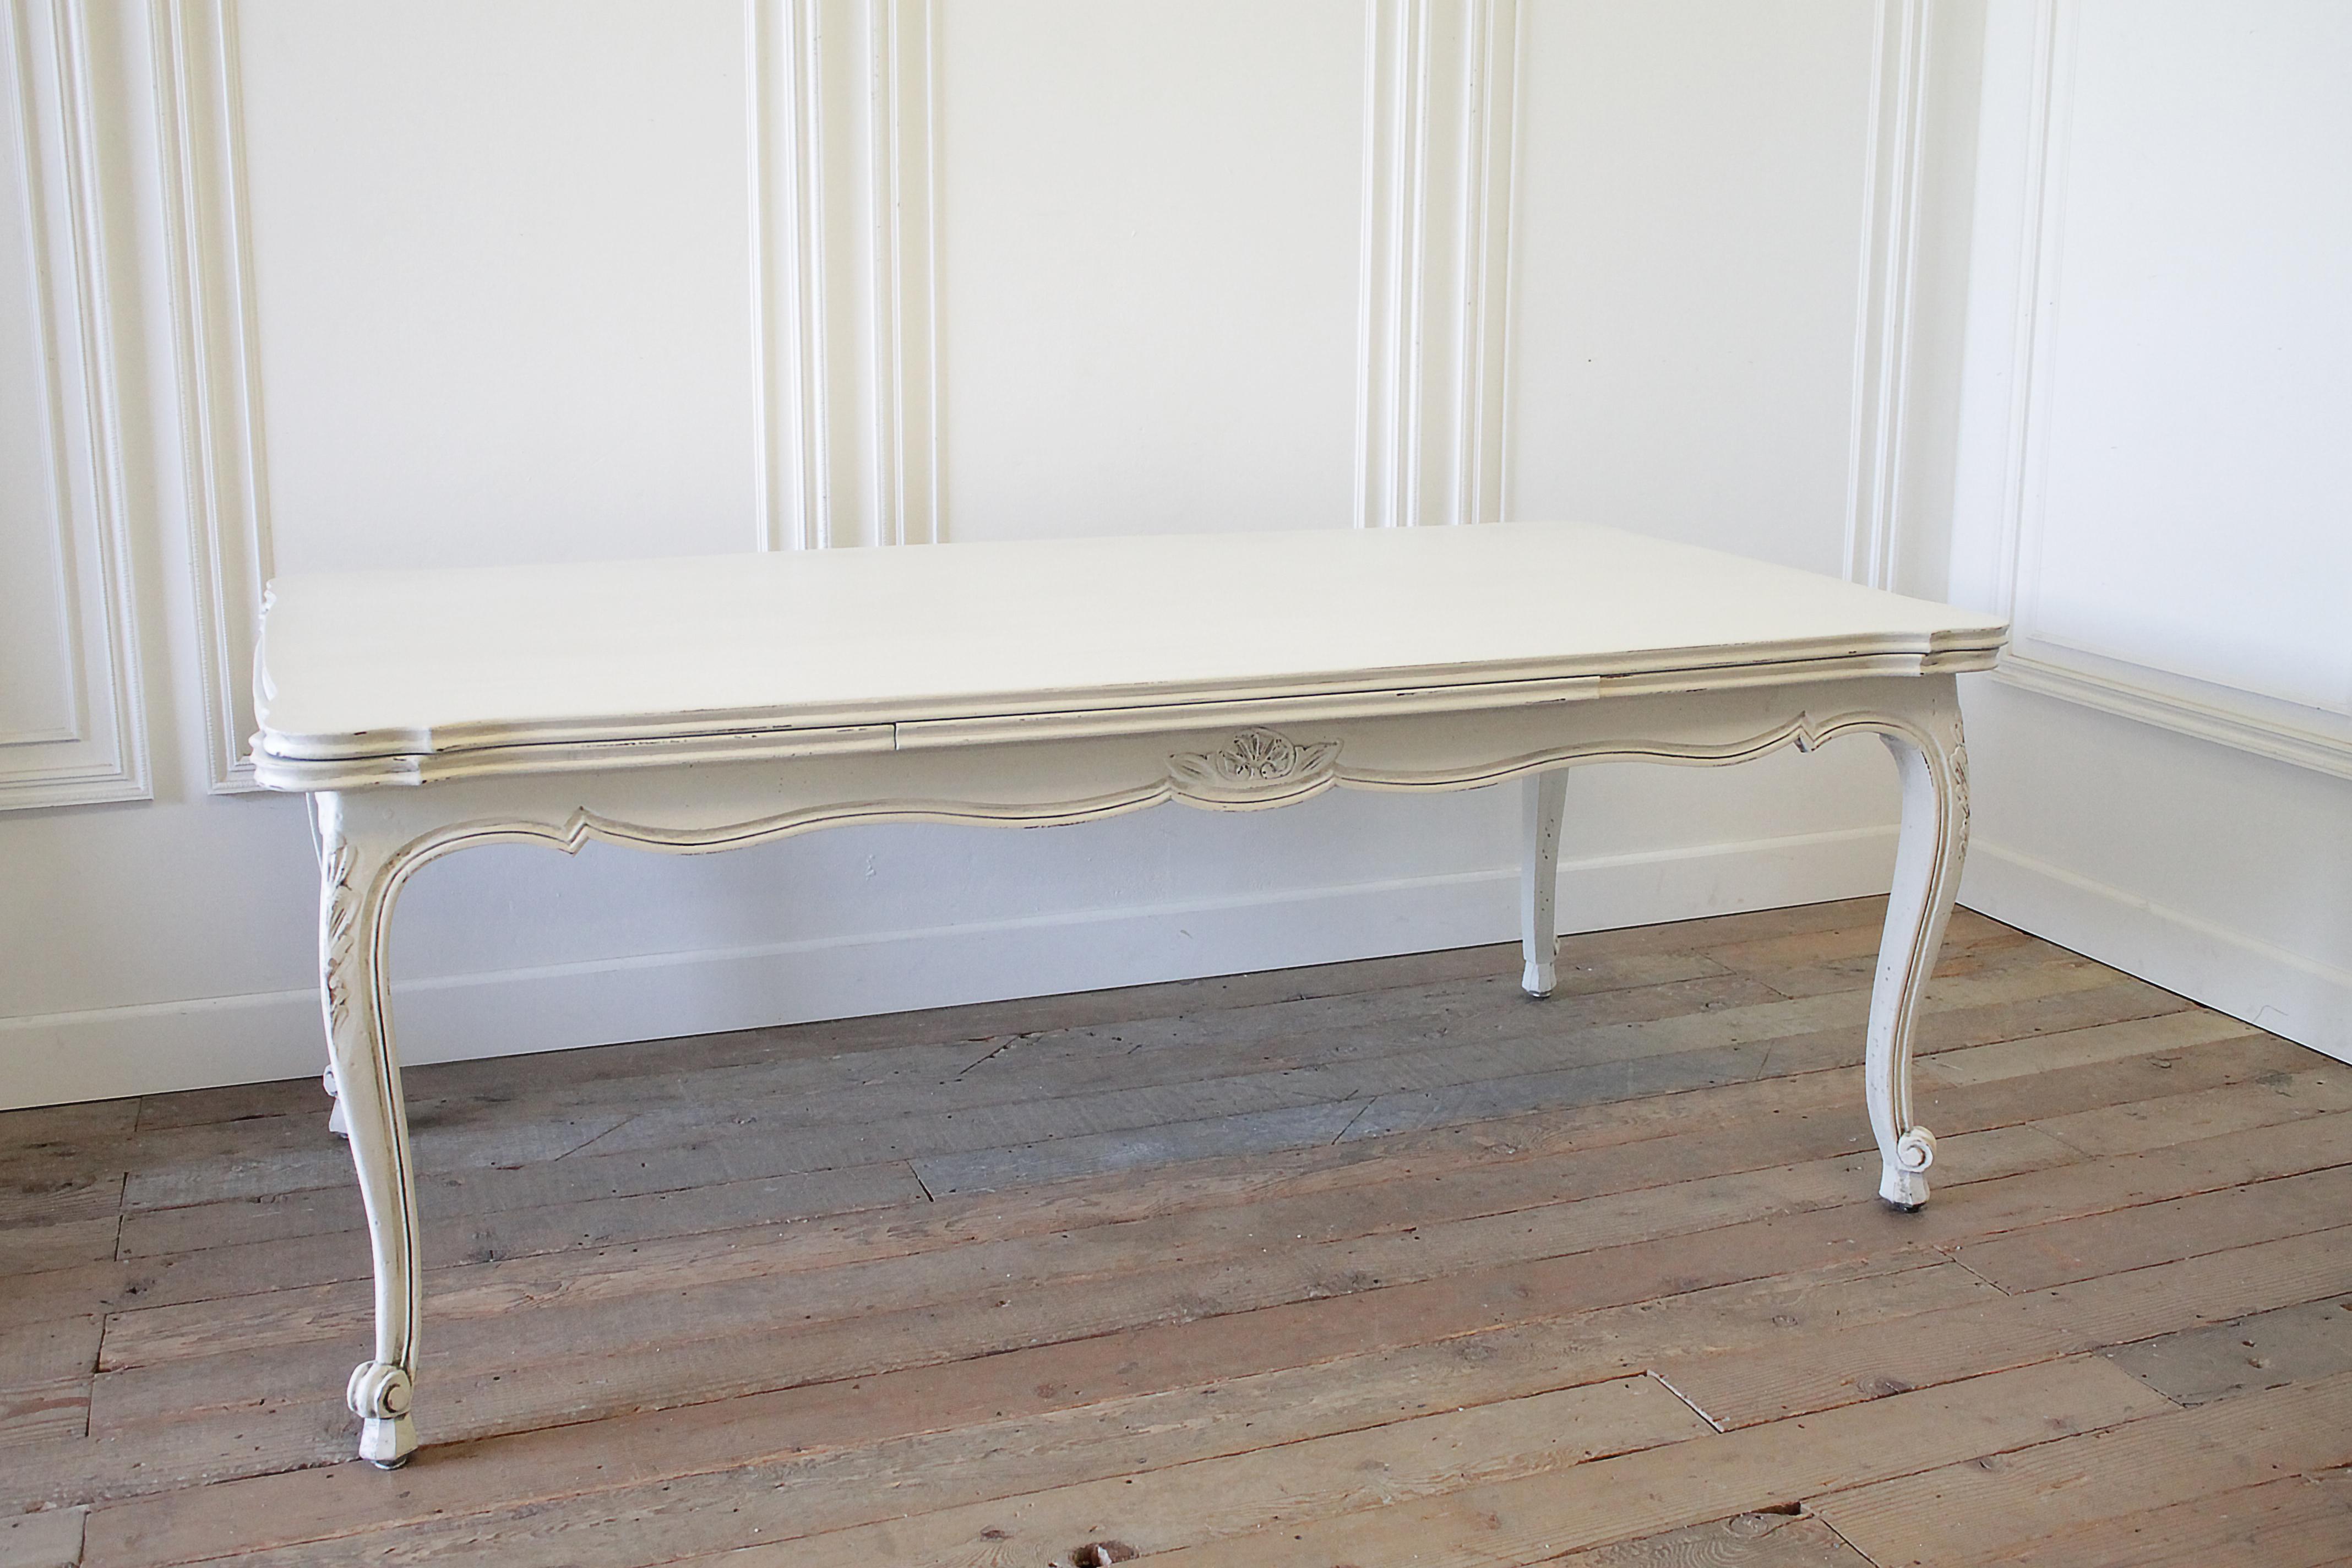 Good quality French farmhouse extending table can seat up to 12. Slight serpentine outer edge, carved frieze and knees. Painted in a off-white with subtle distressed edges, and waxed finish. 
Measures: 78.5